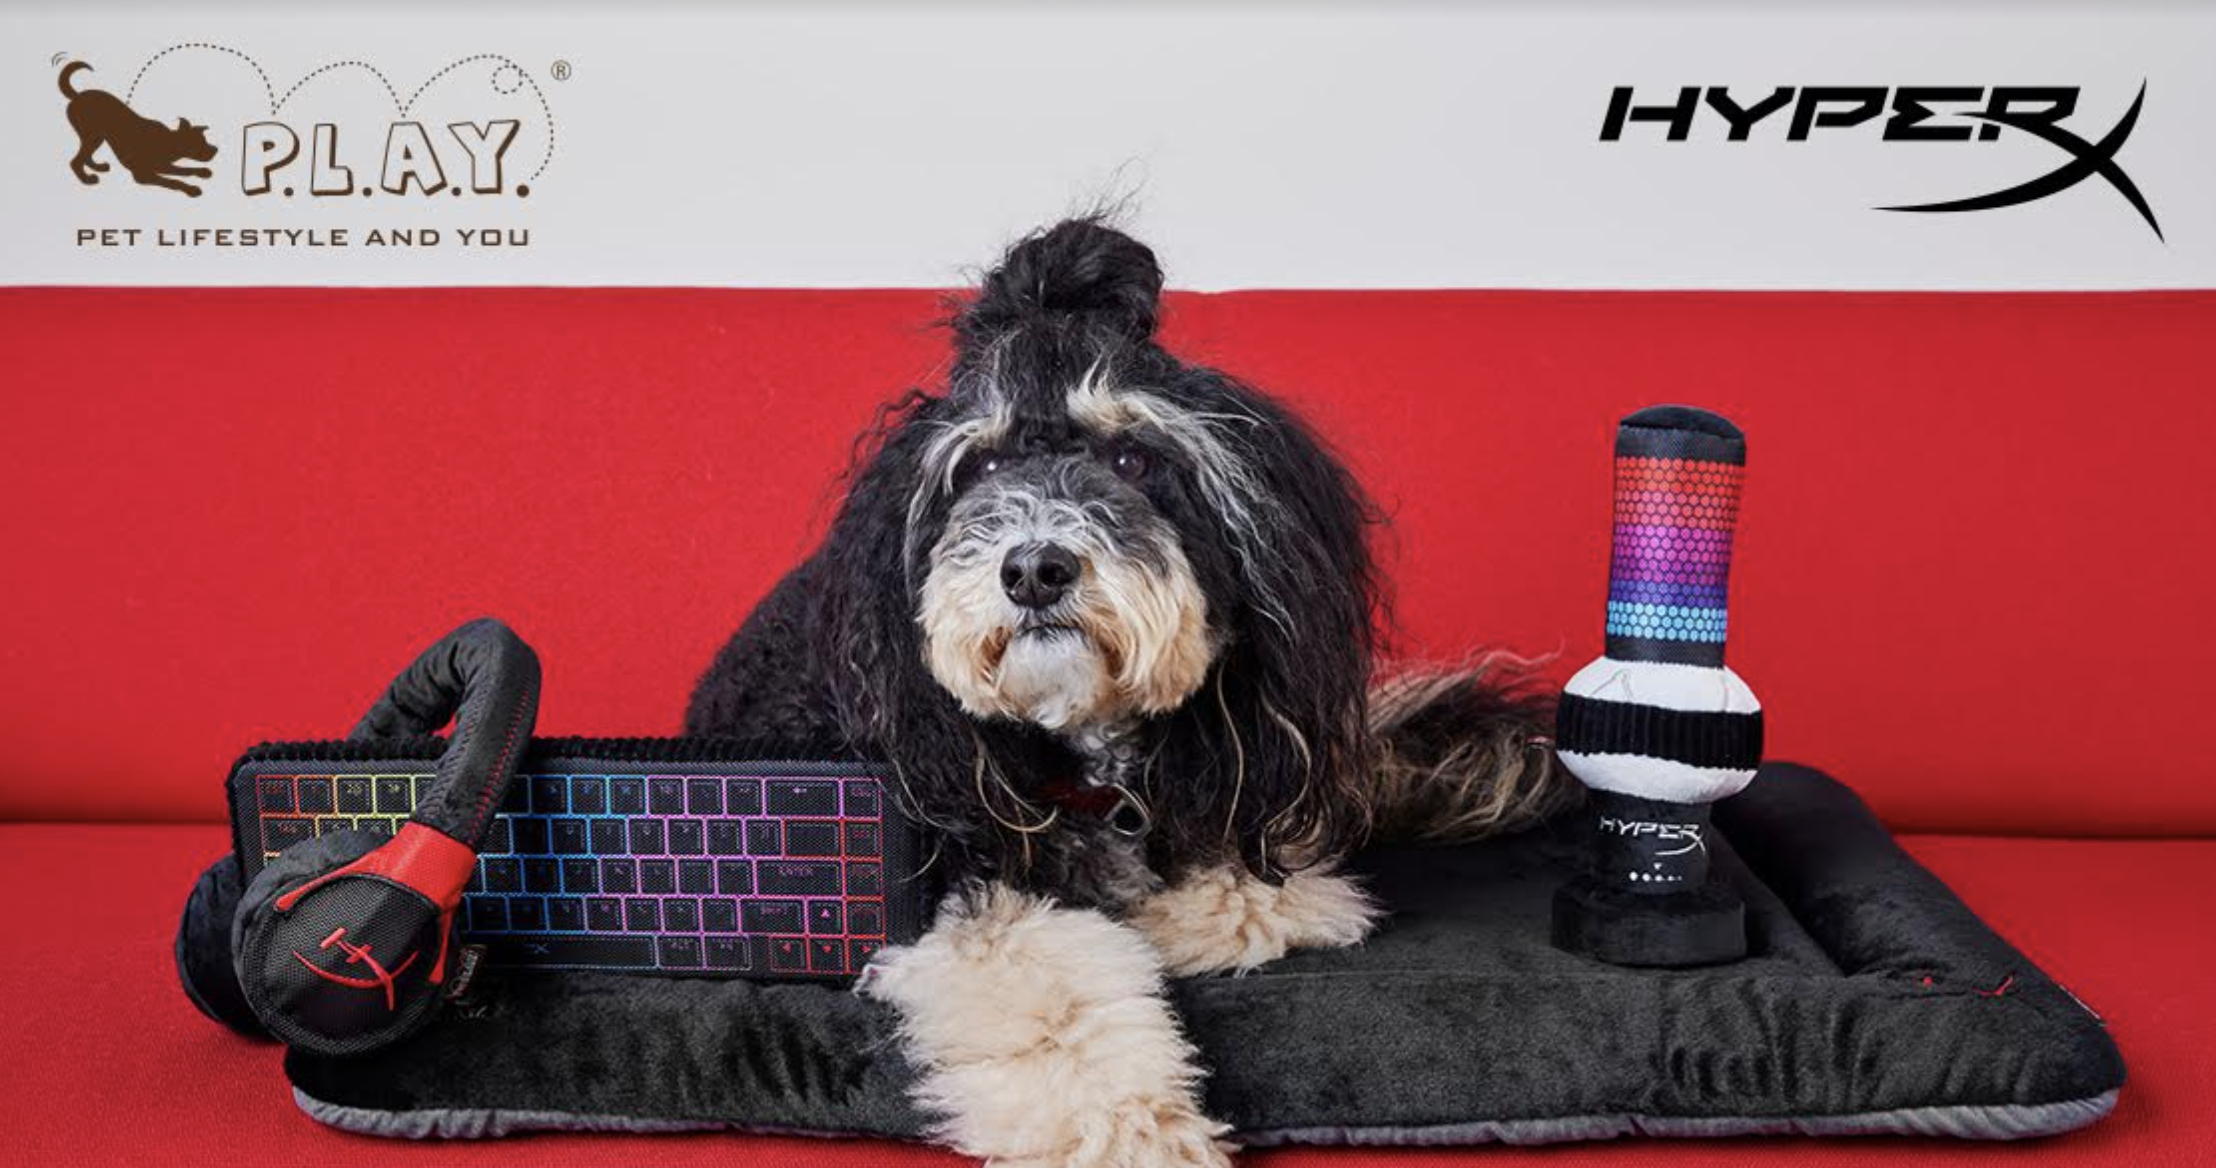 HyperX and P.L.A.Y. Join Forces to Launch First-of-its-Kind Innovative Pet Toy Collaboration